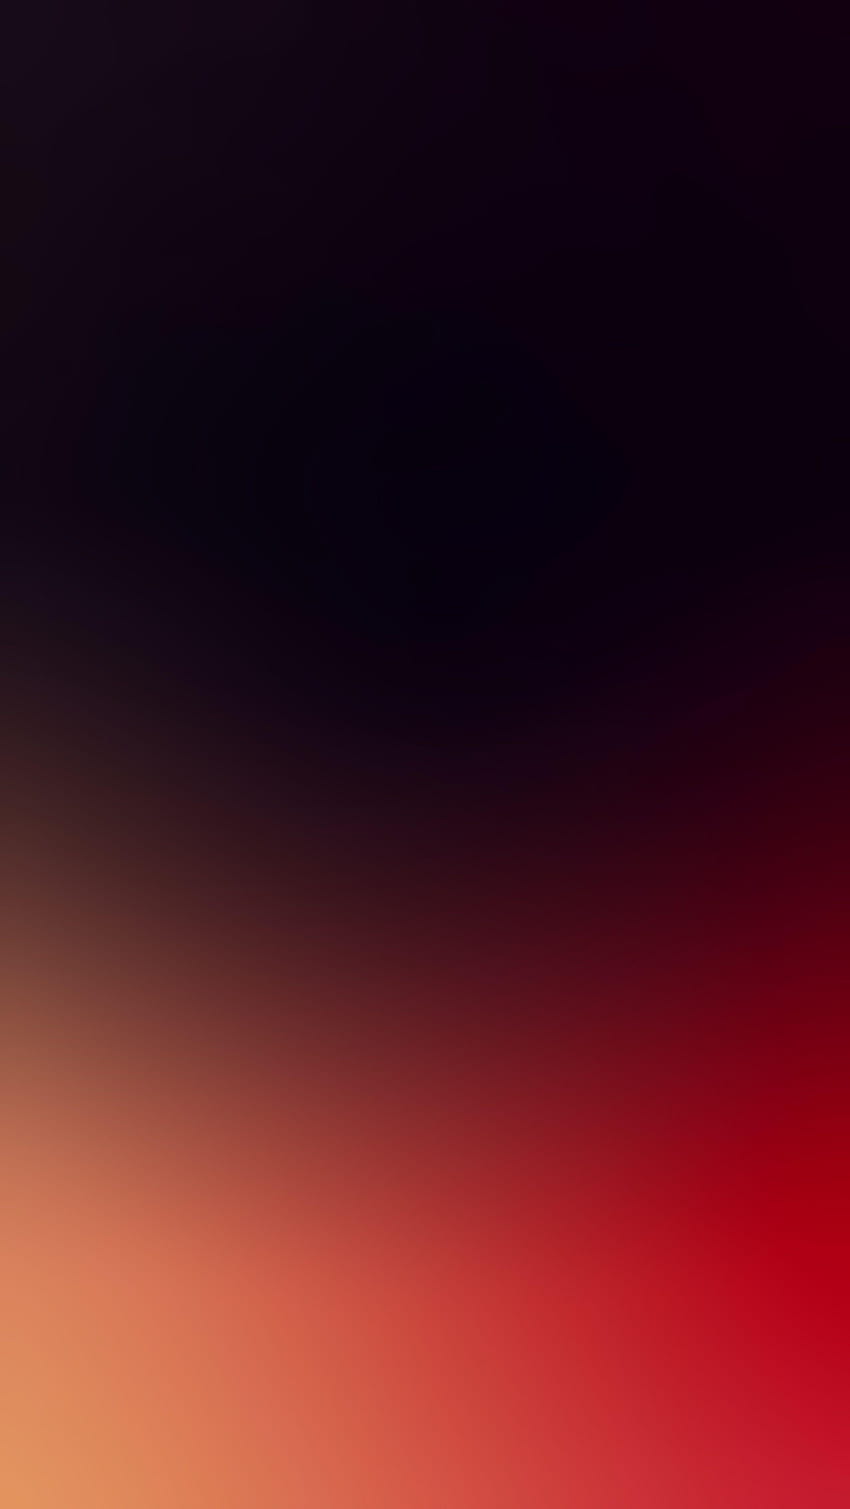 Here's my version of that red/black gradient that's so, red gradient HD phone wallpaper